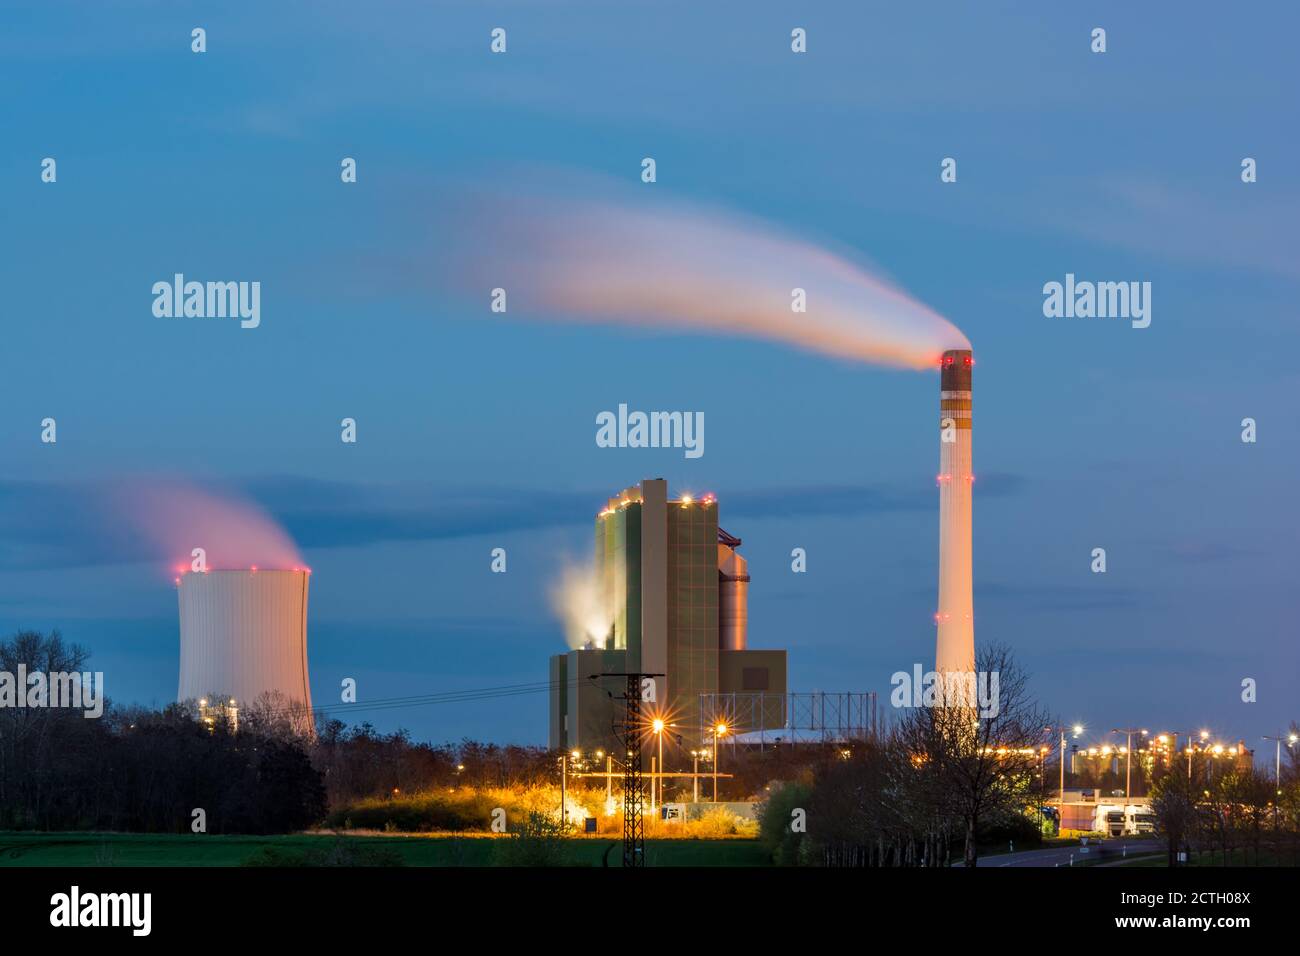 Large industrial plant with cooling tower and smoking chimney at night Stock Photo